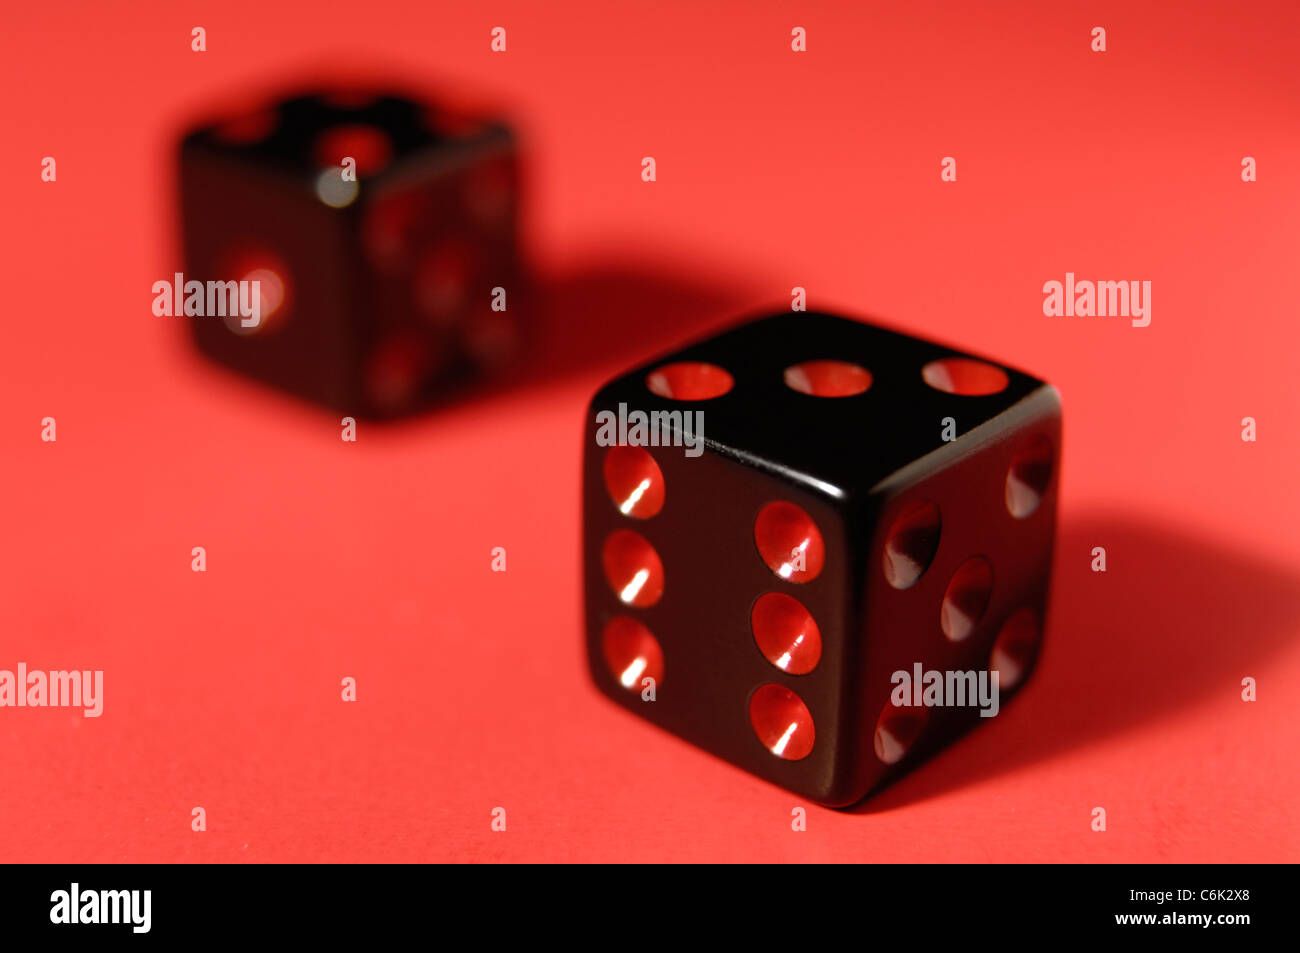 Pair of black dice isolated on red background Stock Photo